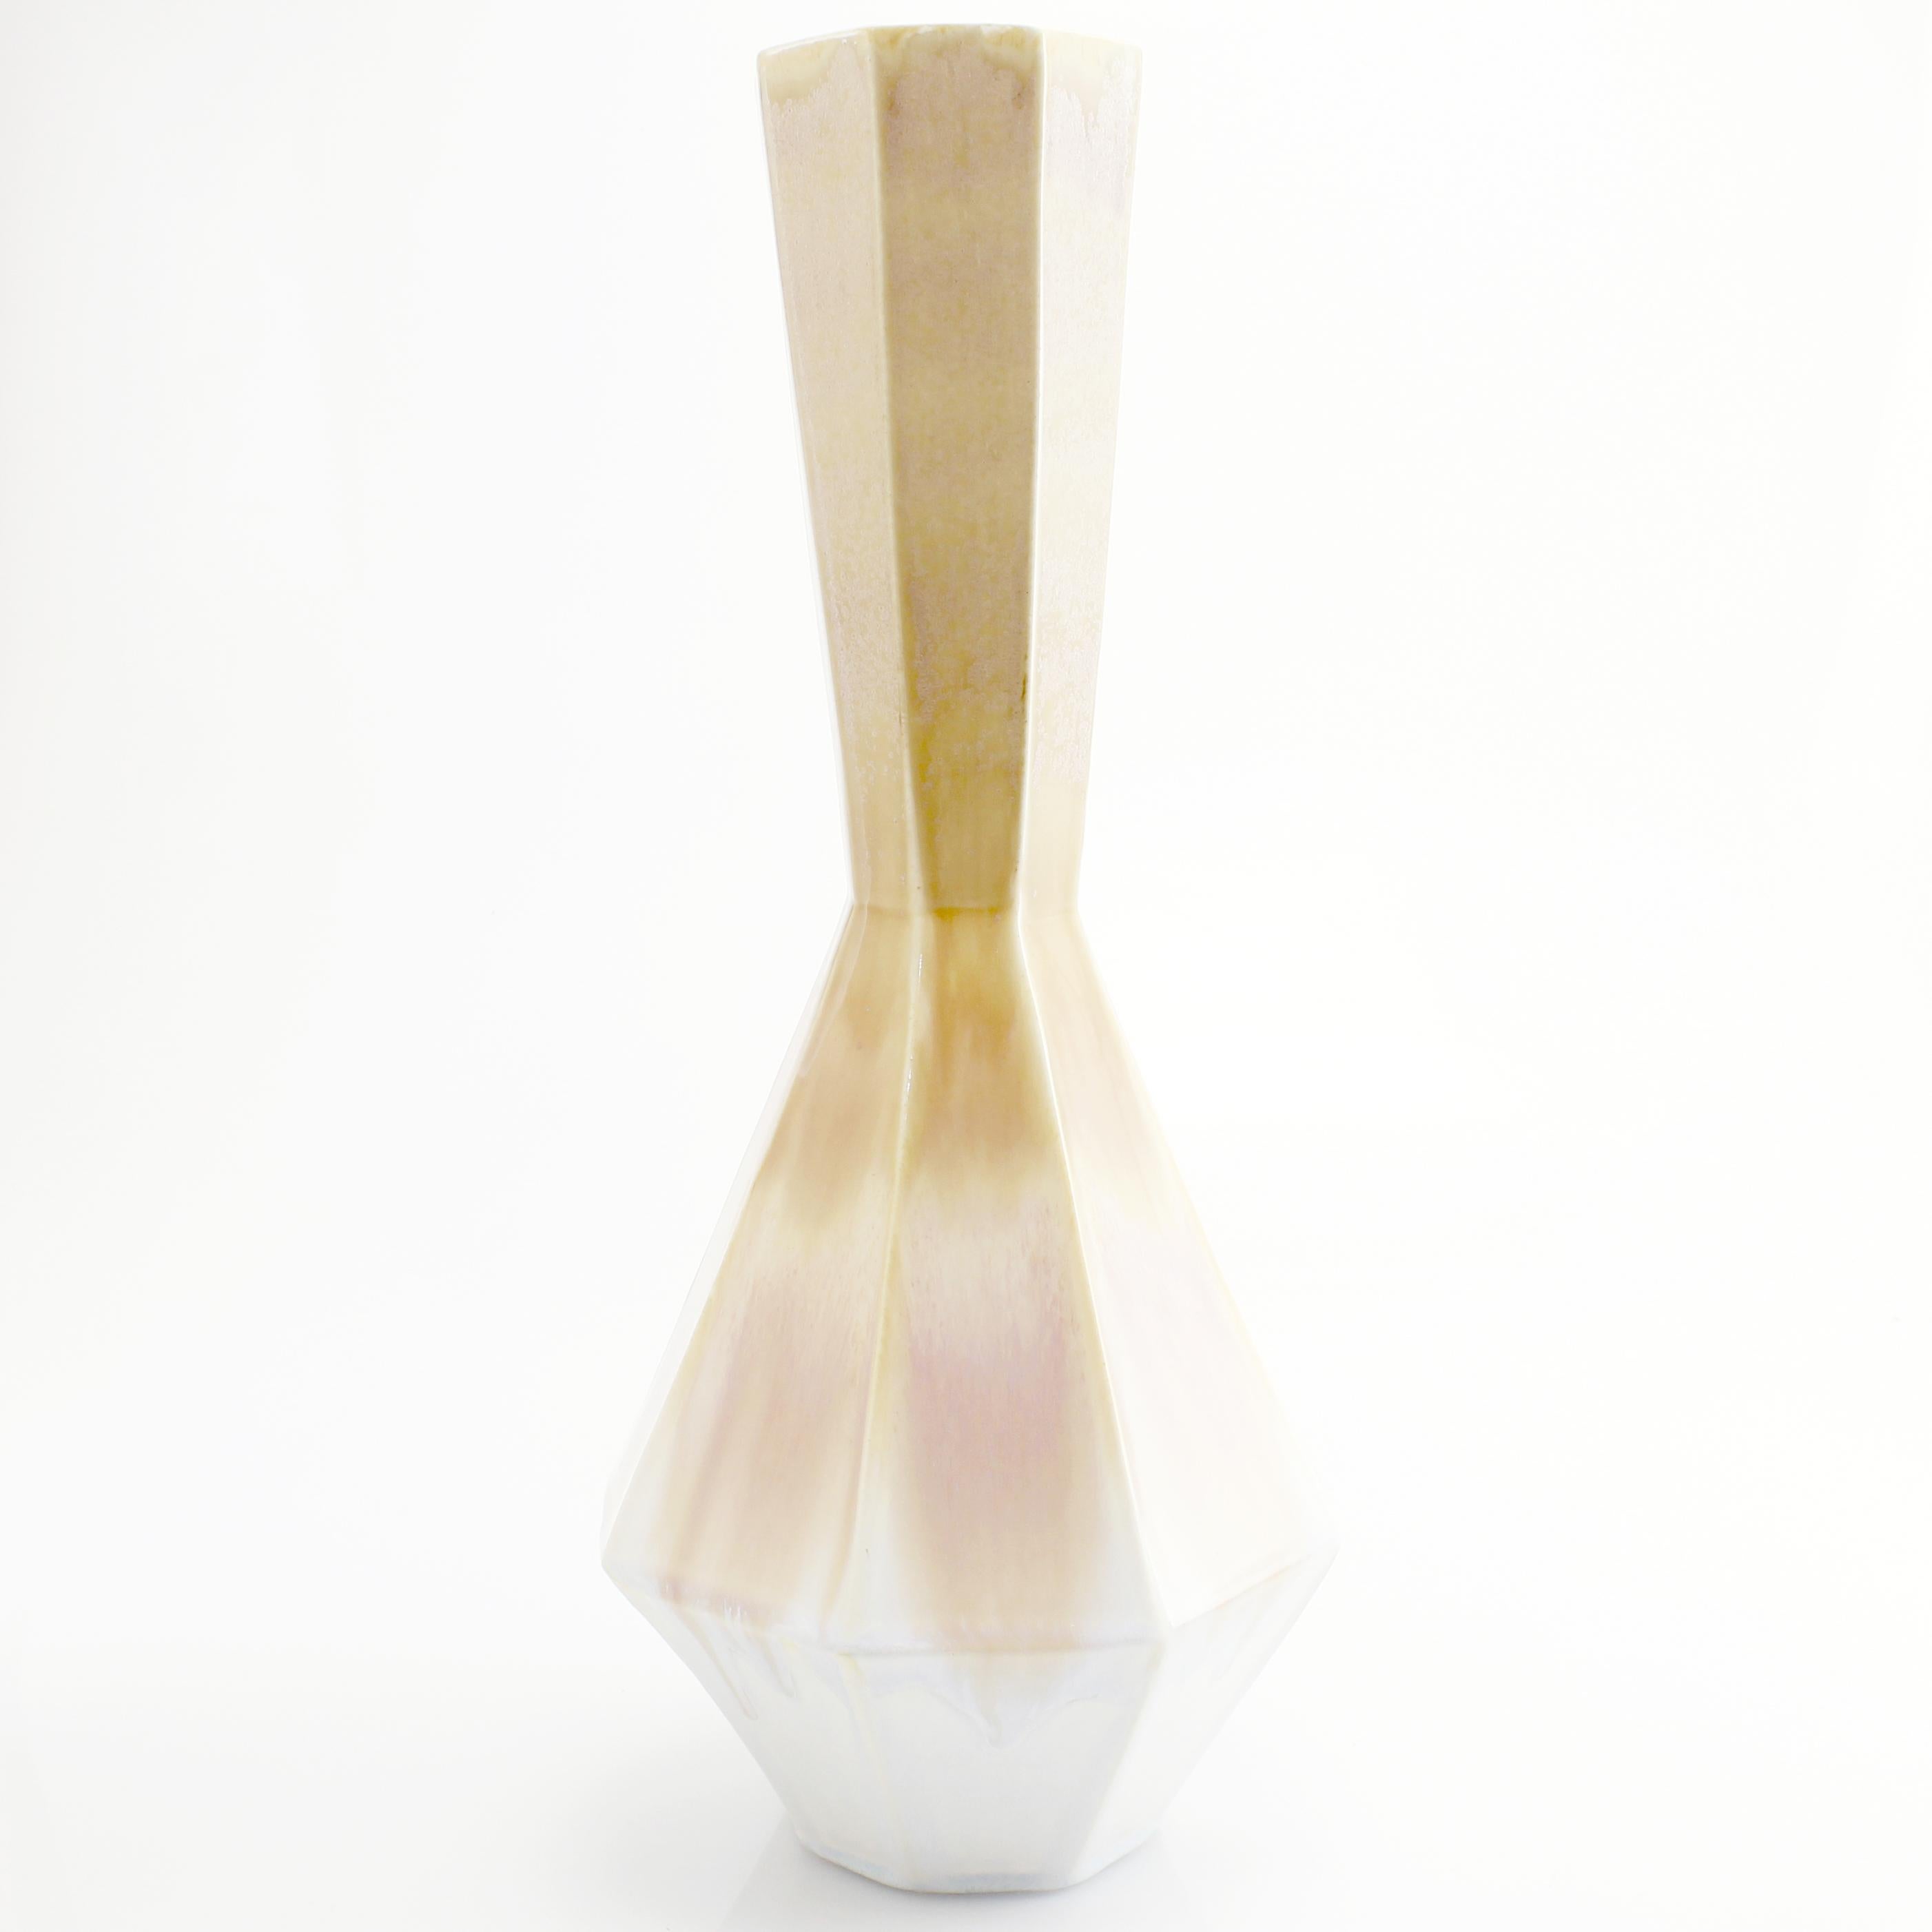 Geometric Statement Vase Blush Sand Modern Contemporary Porcelain Minimalism In New Condition For Sale In Asheville, NC